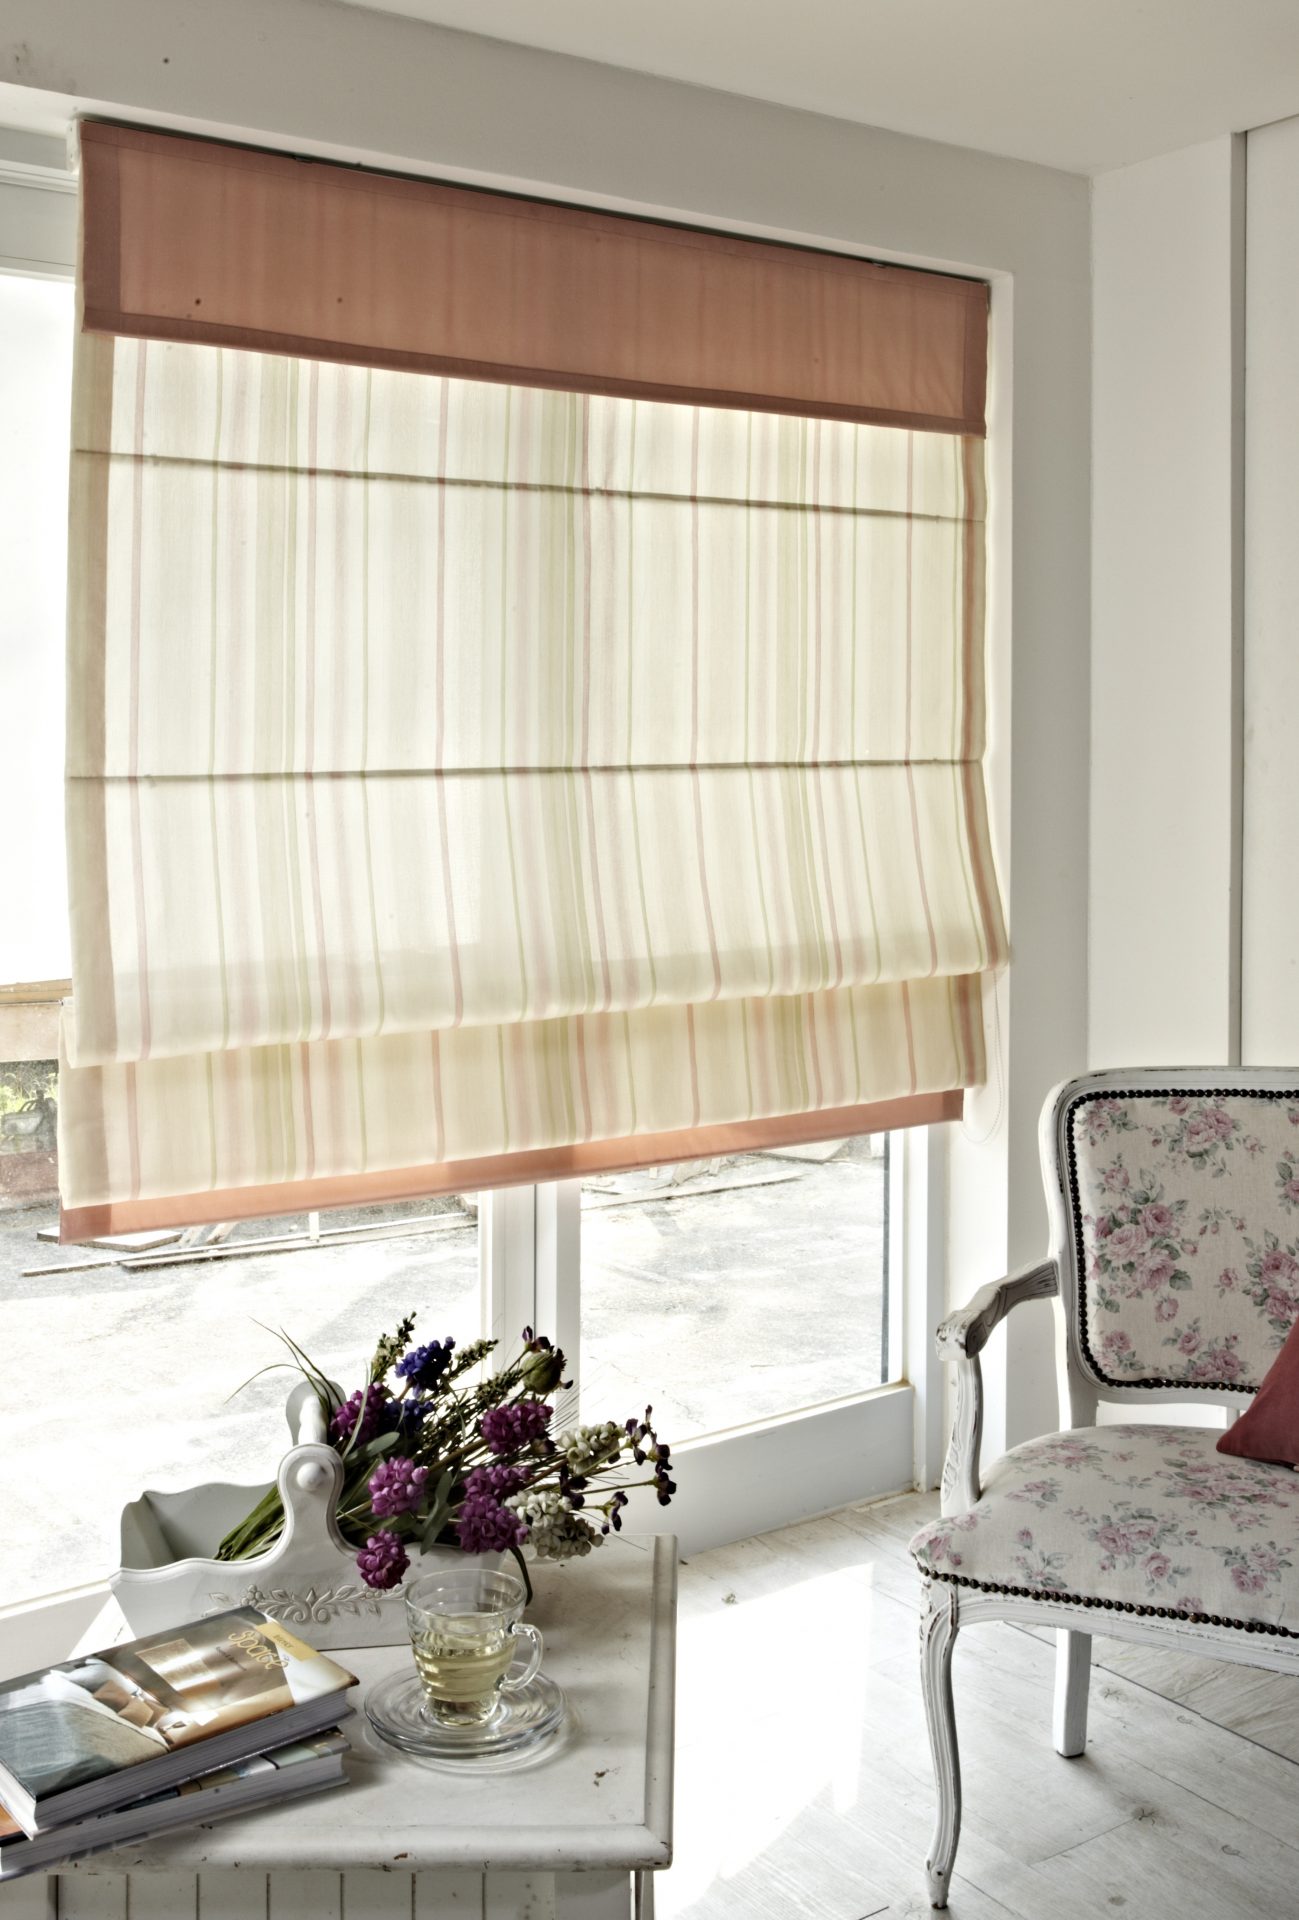 How to Clean window blinds the easy way